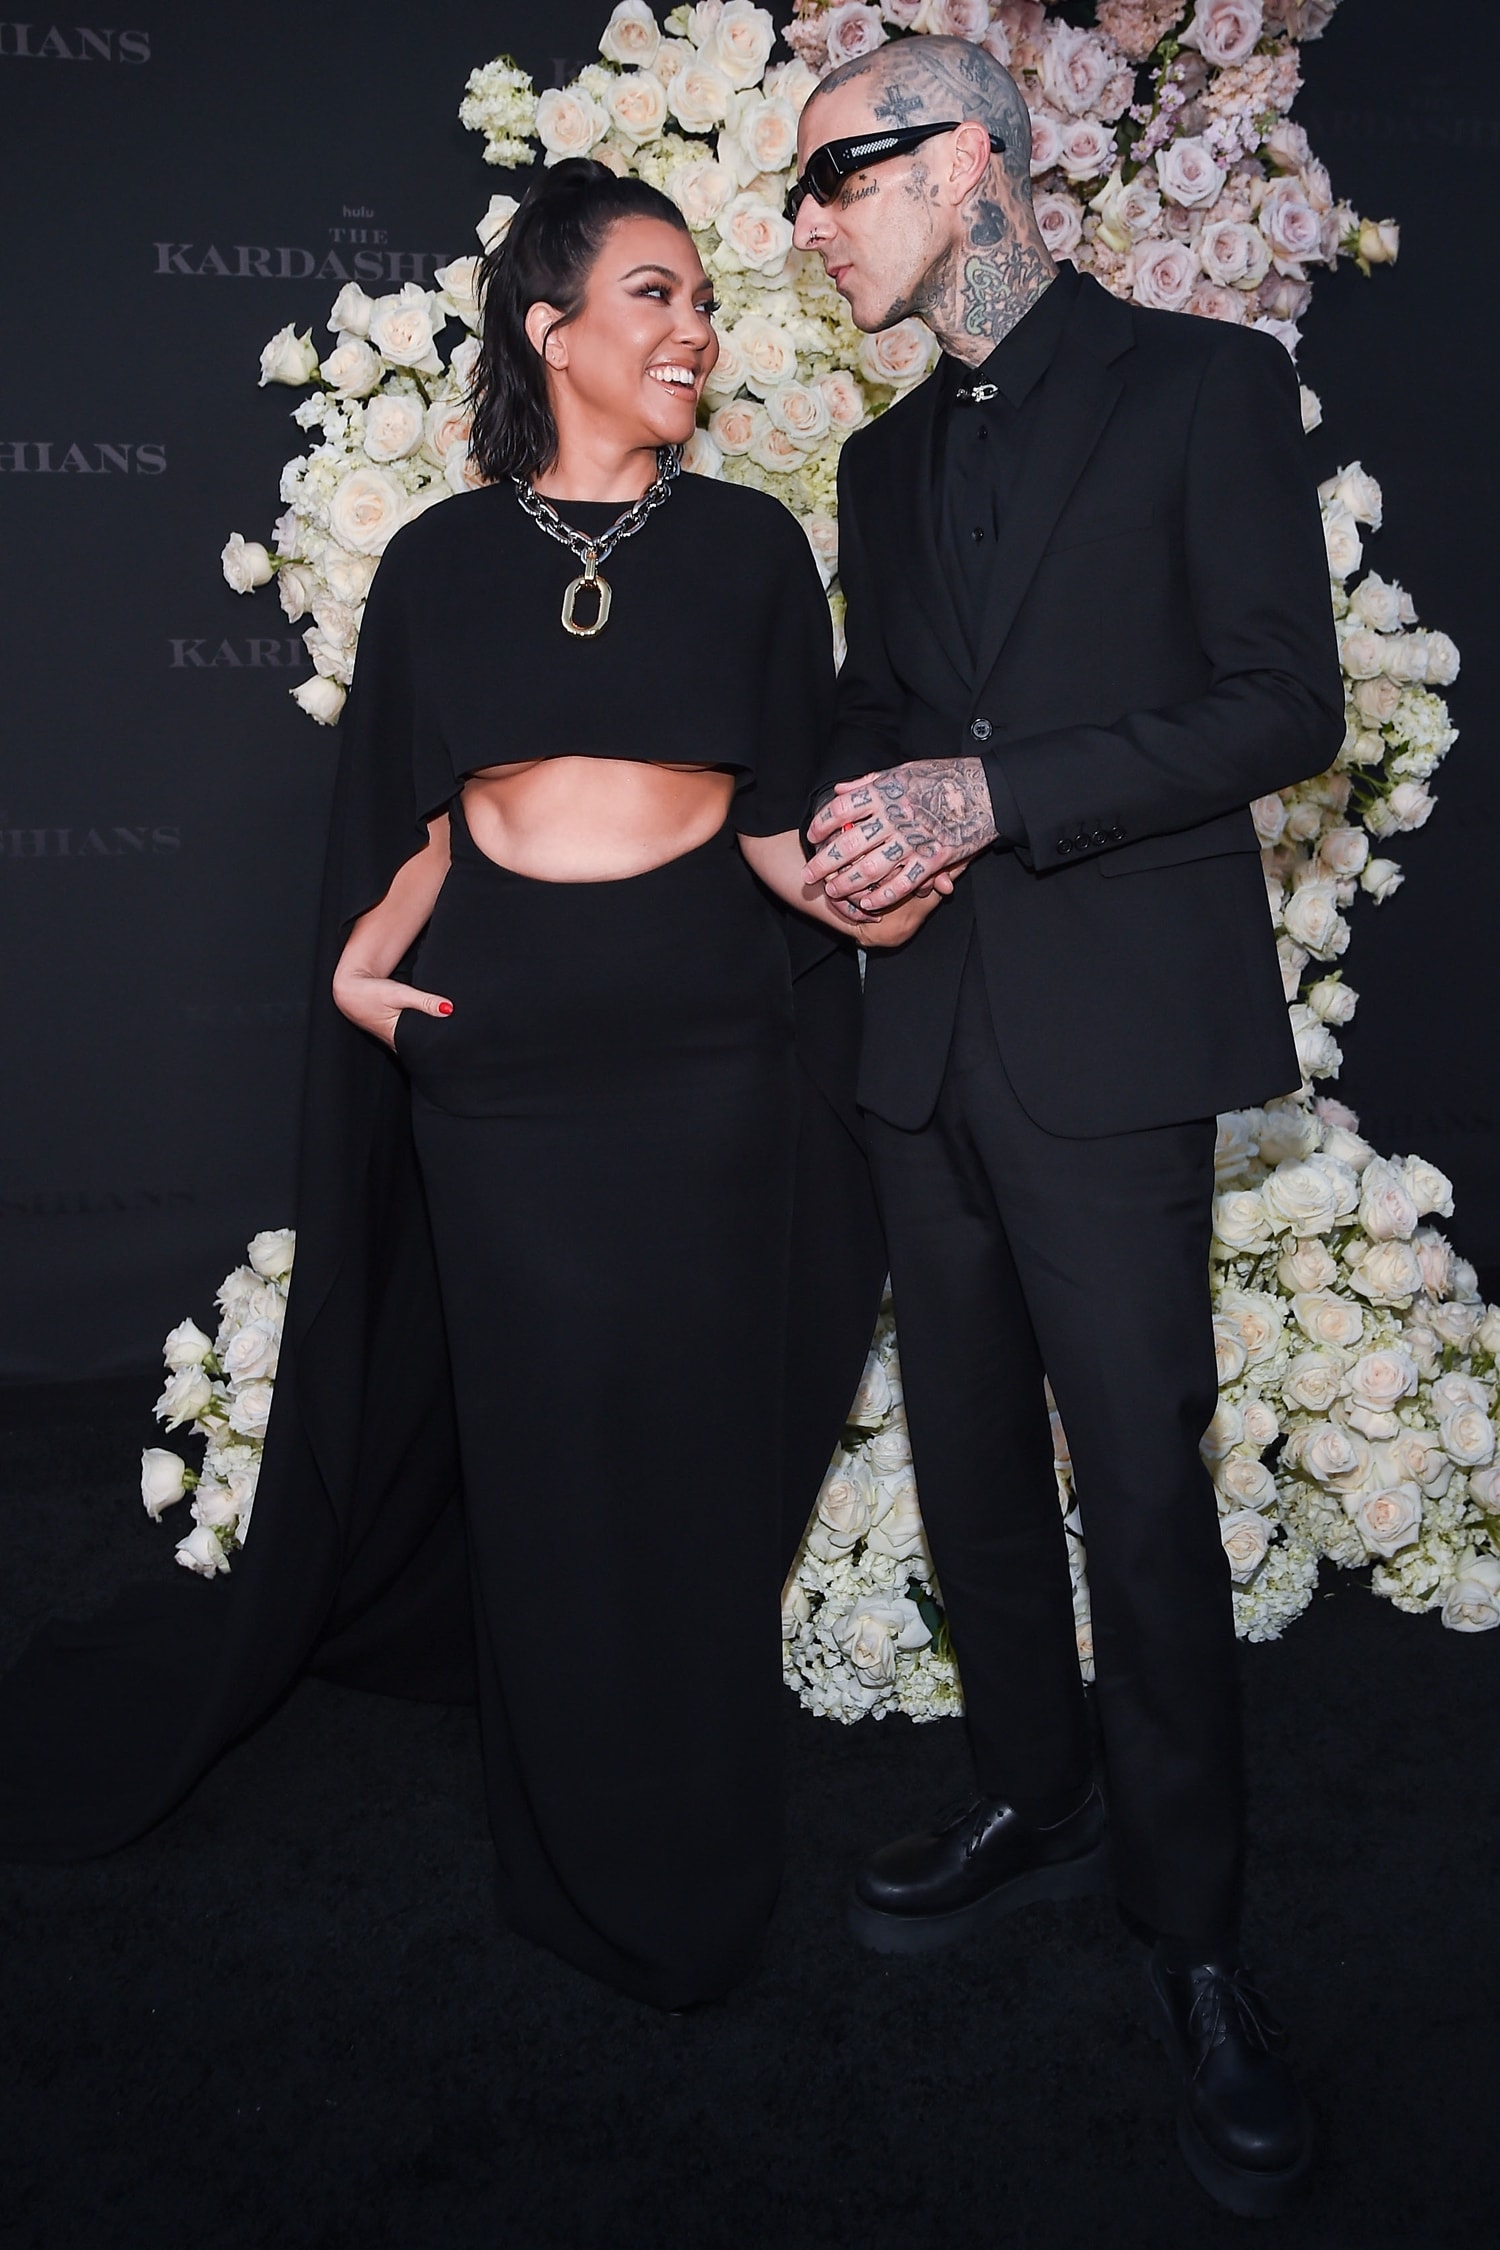 Kourtney Kardashian in a Valentino Fall 2022 cutout dress and Travis Barker at the Los Angeles premiere of Hulu's new show "The Kardashians"